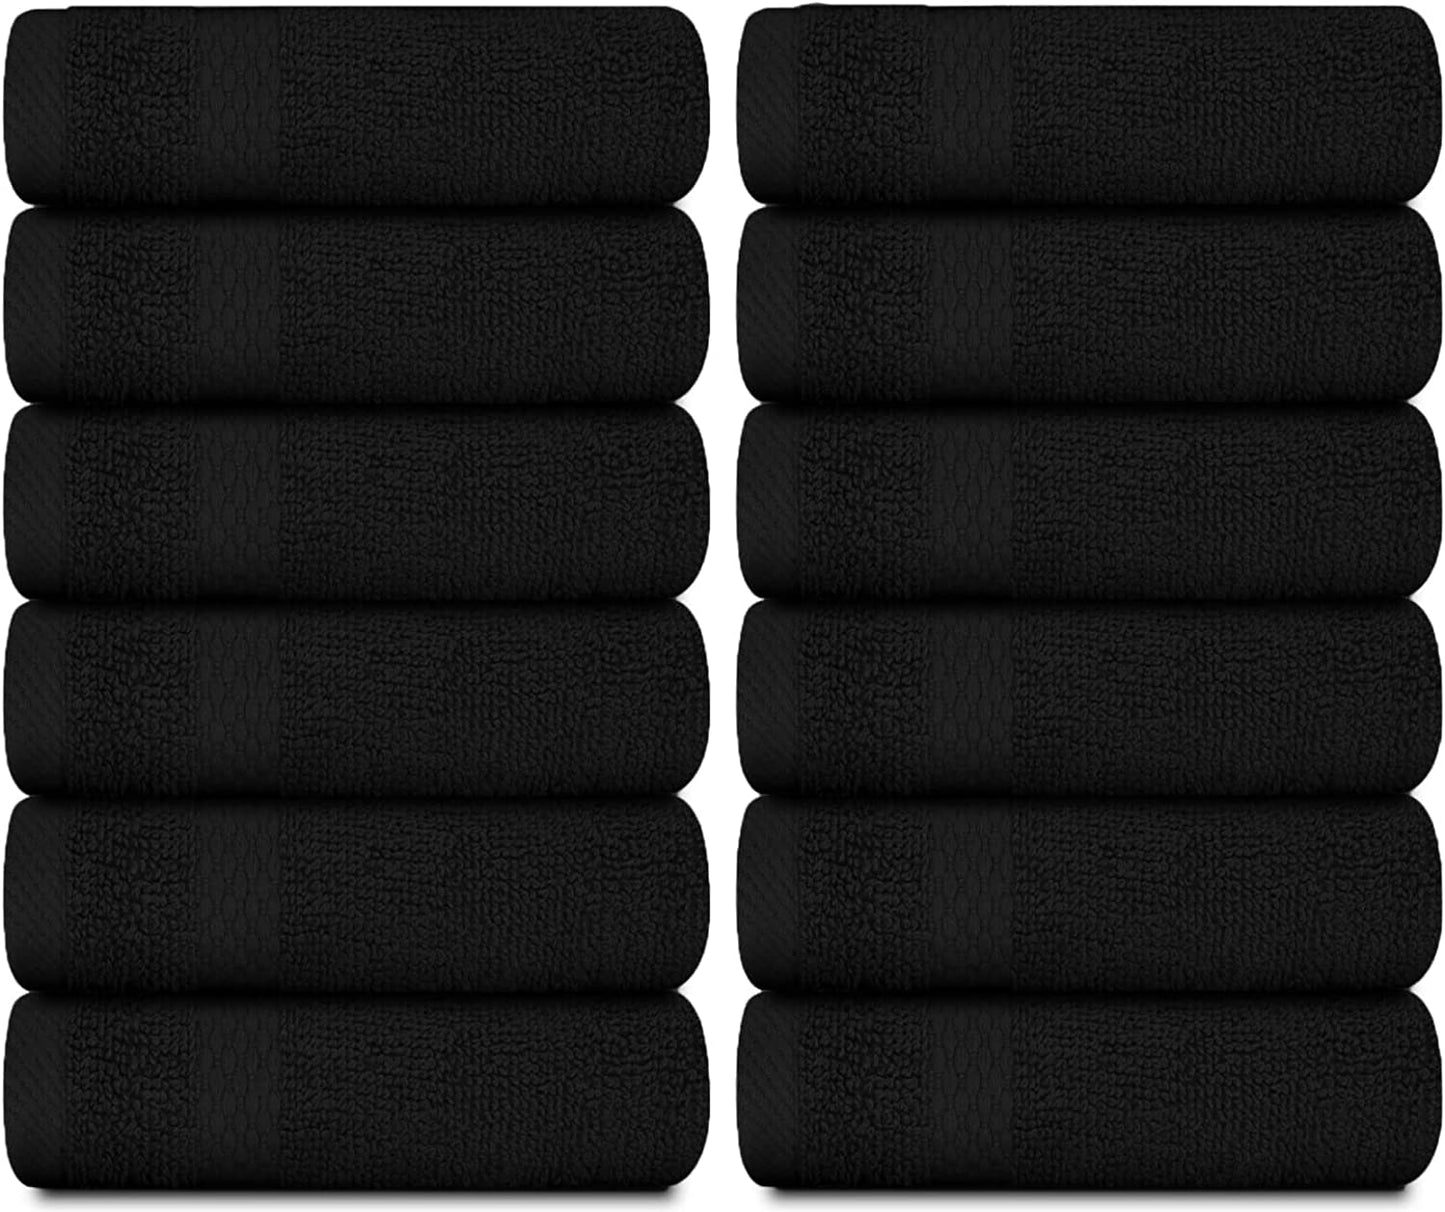 Luxury Cotton Washcloths Set 12 Pack - Hotel Quality Cleansing Face Towels Set, Black Small Bathroom Hand Towels | 12 Pack | Black